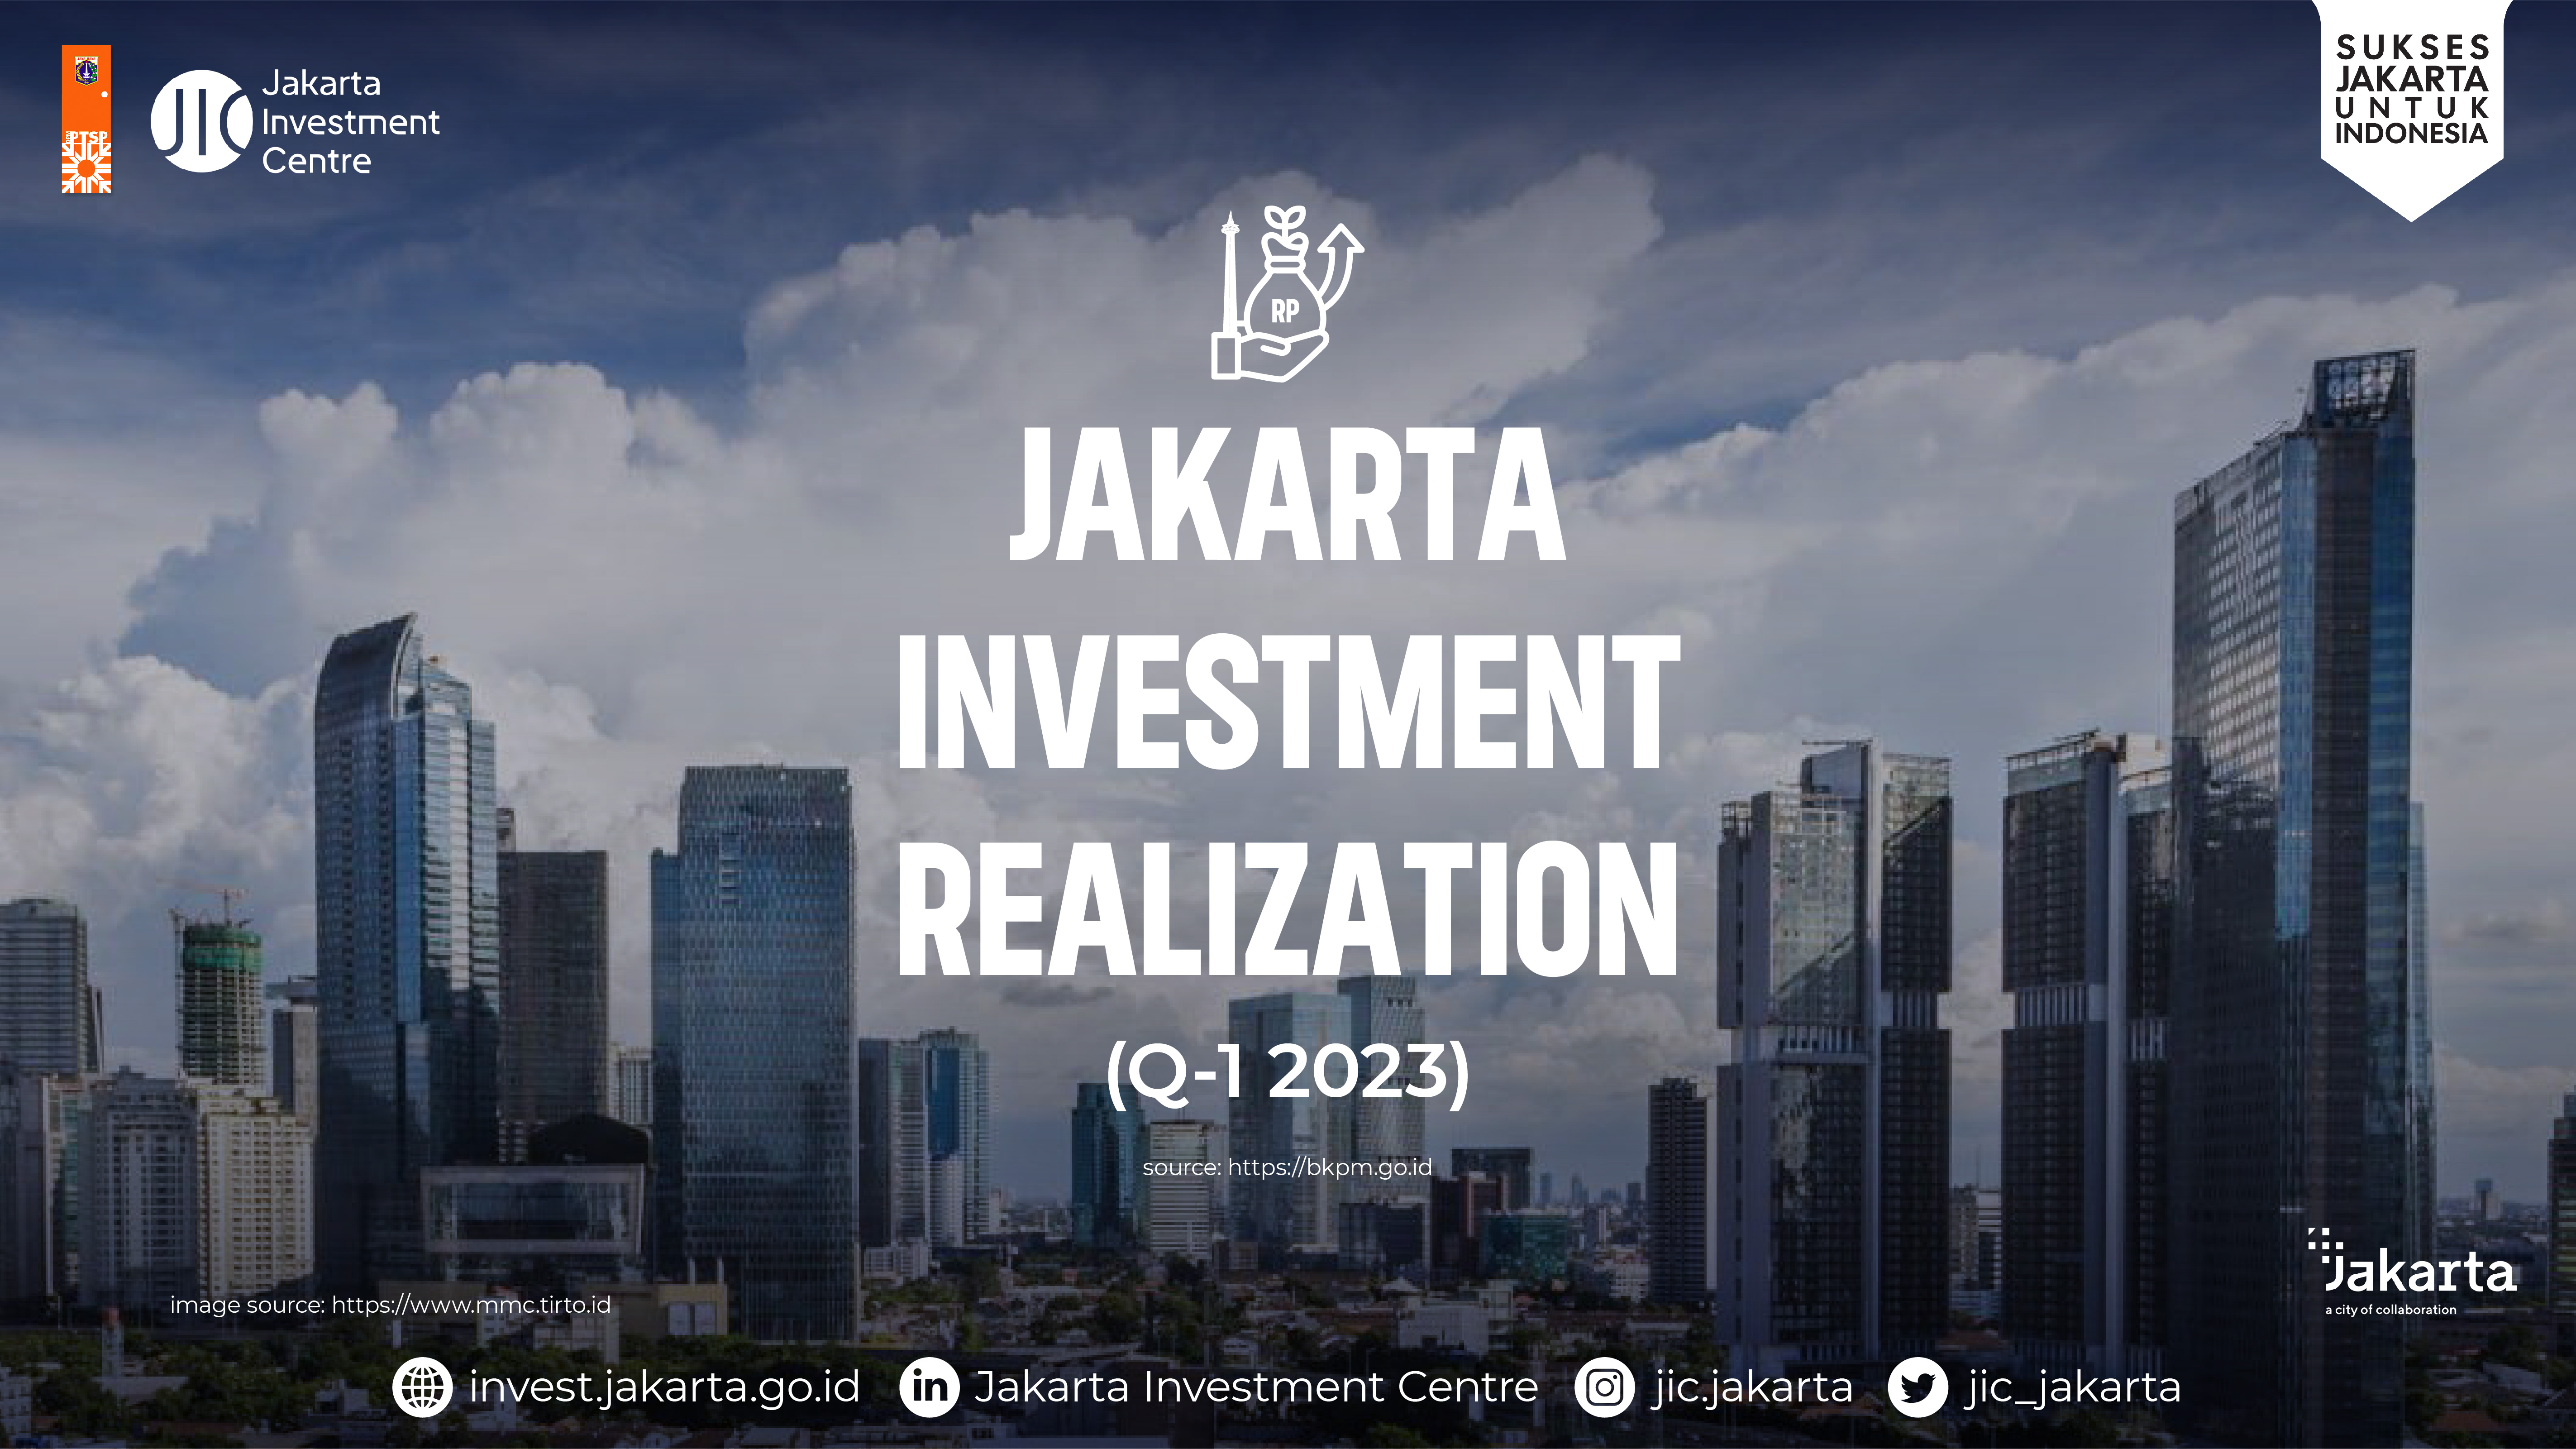 Investment Realization in Jakarta: Q1 (January - March) 2023